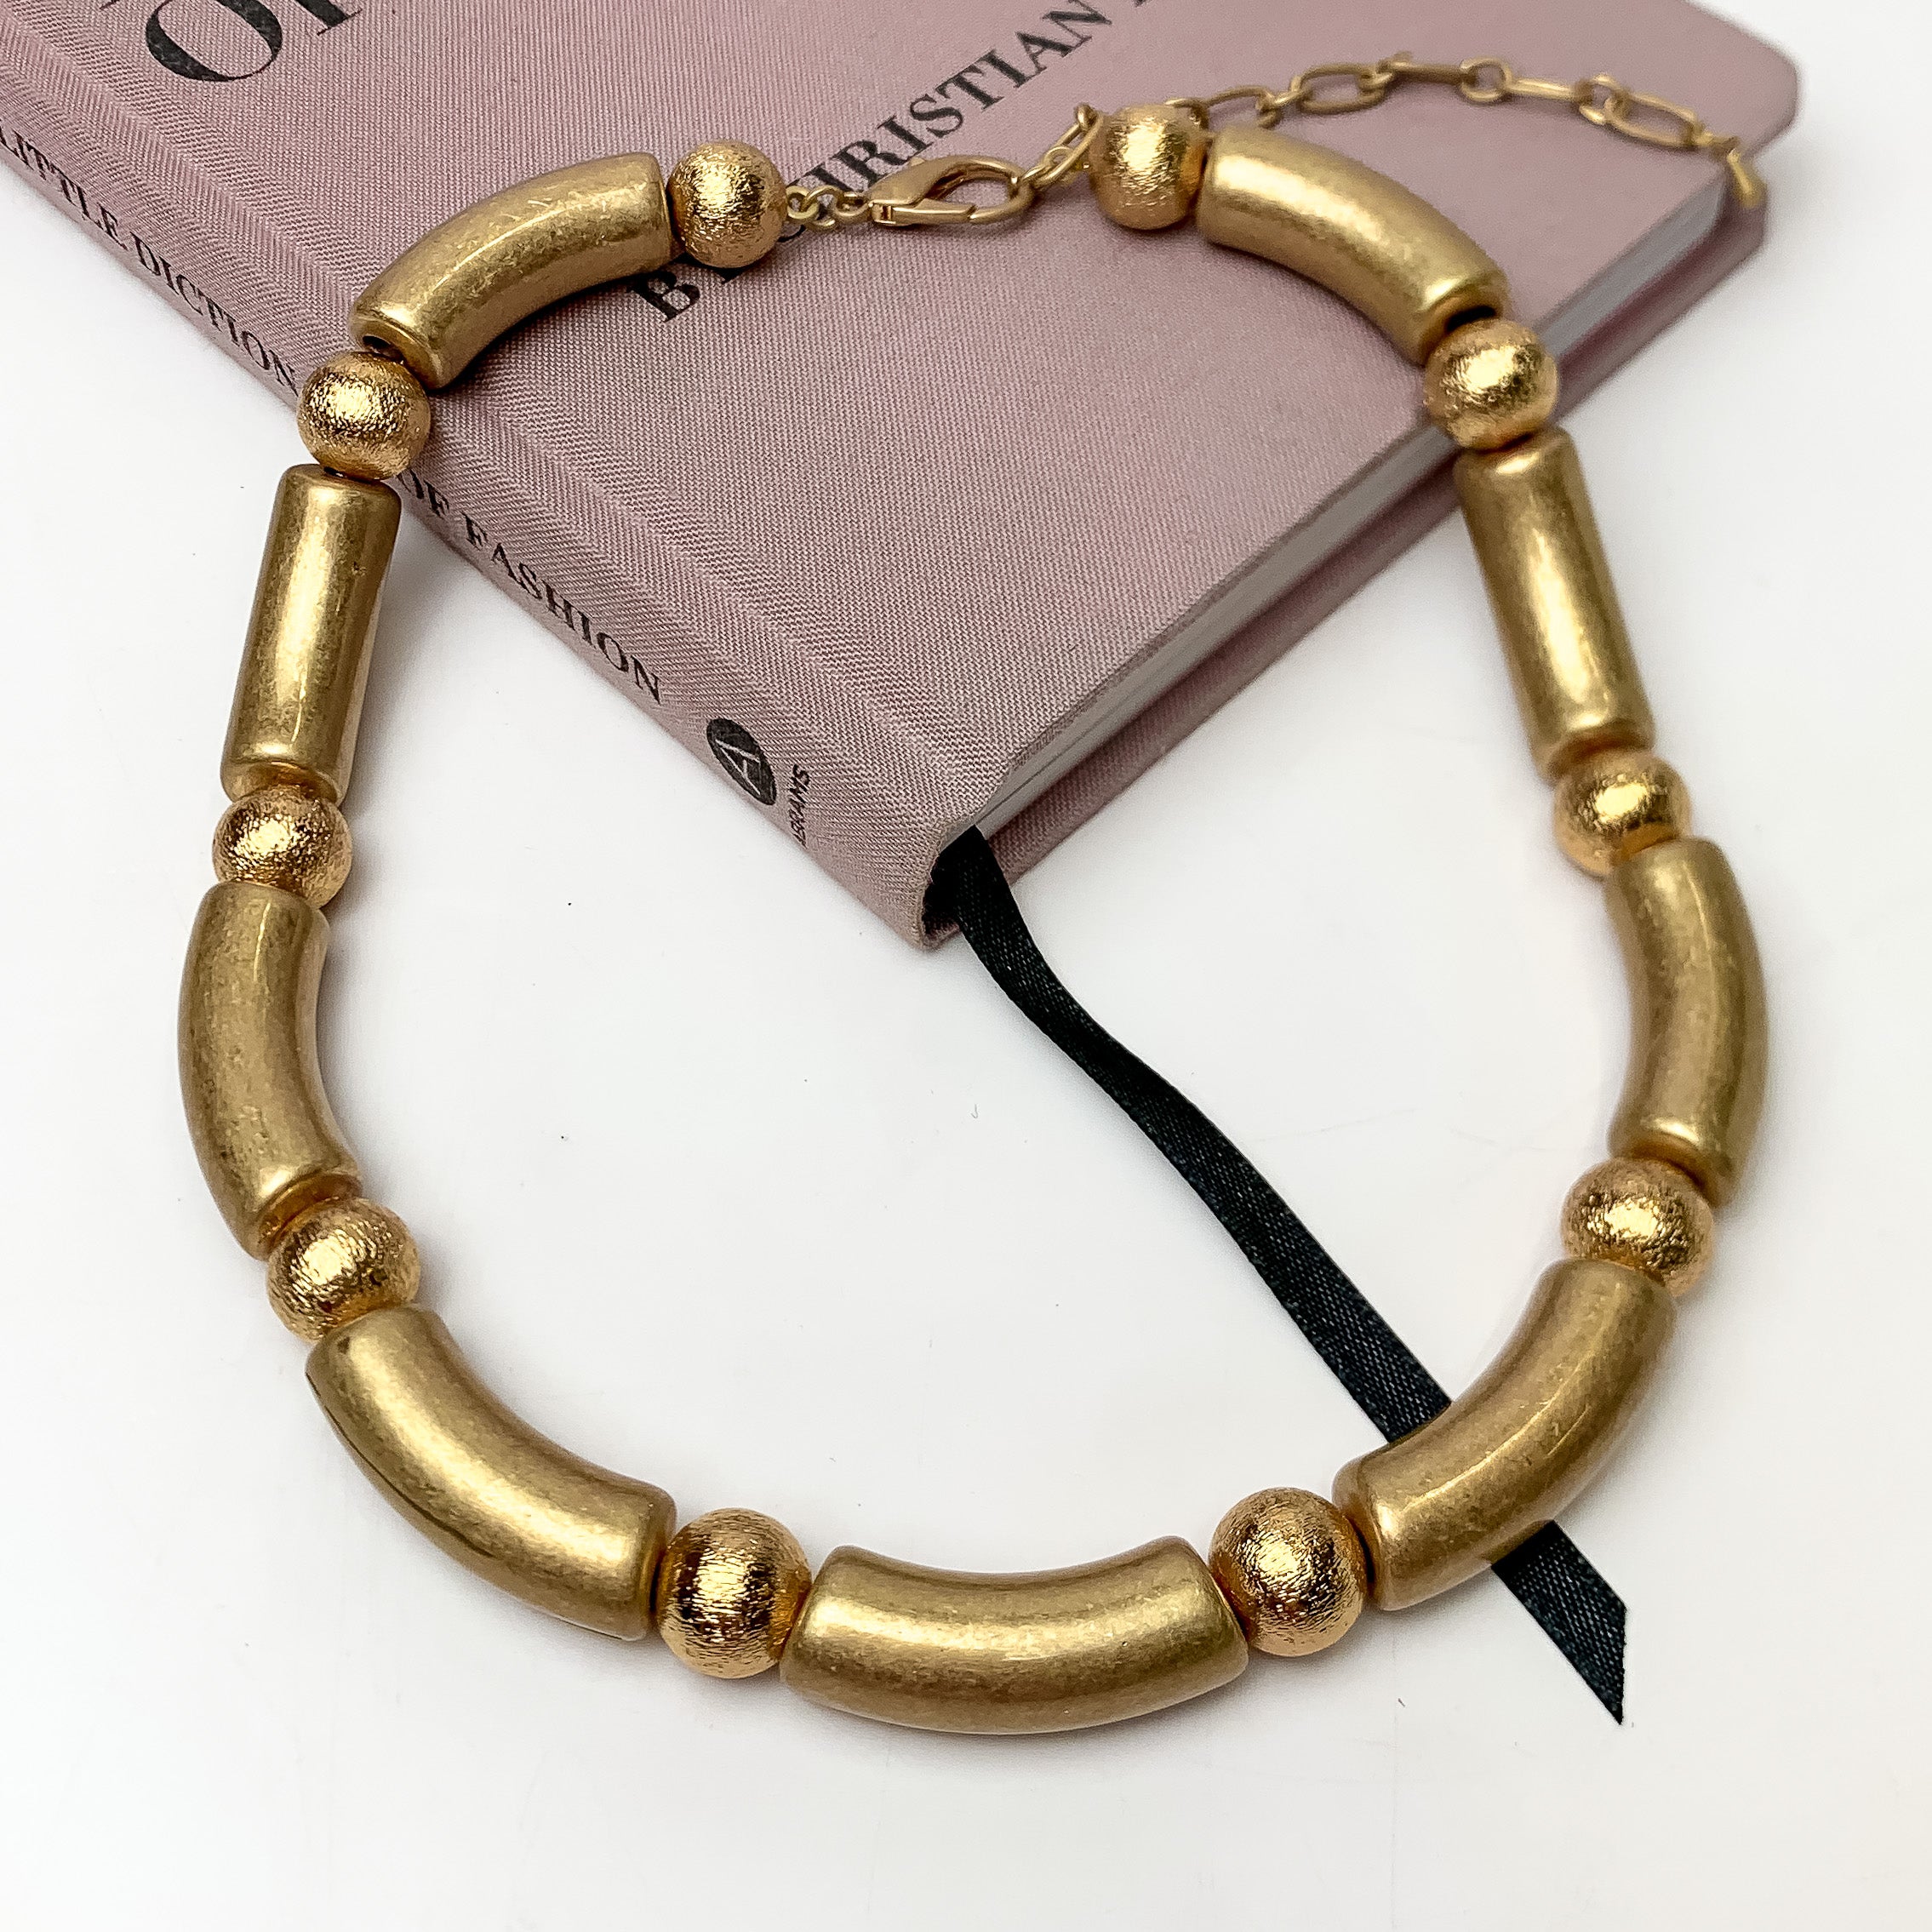 The One To Impress Gold Tone Necklace. This necklace is pictured on a white background with part of it on a pink book.